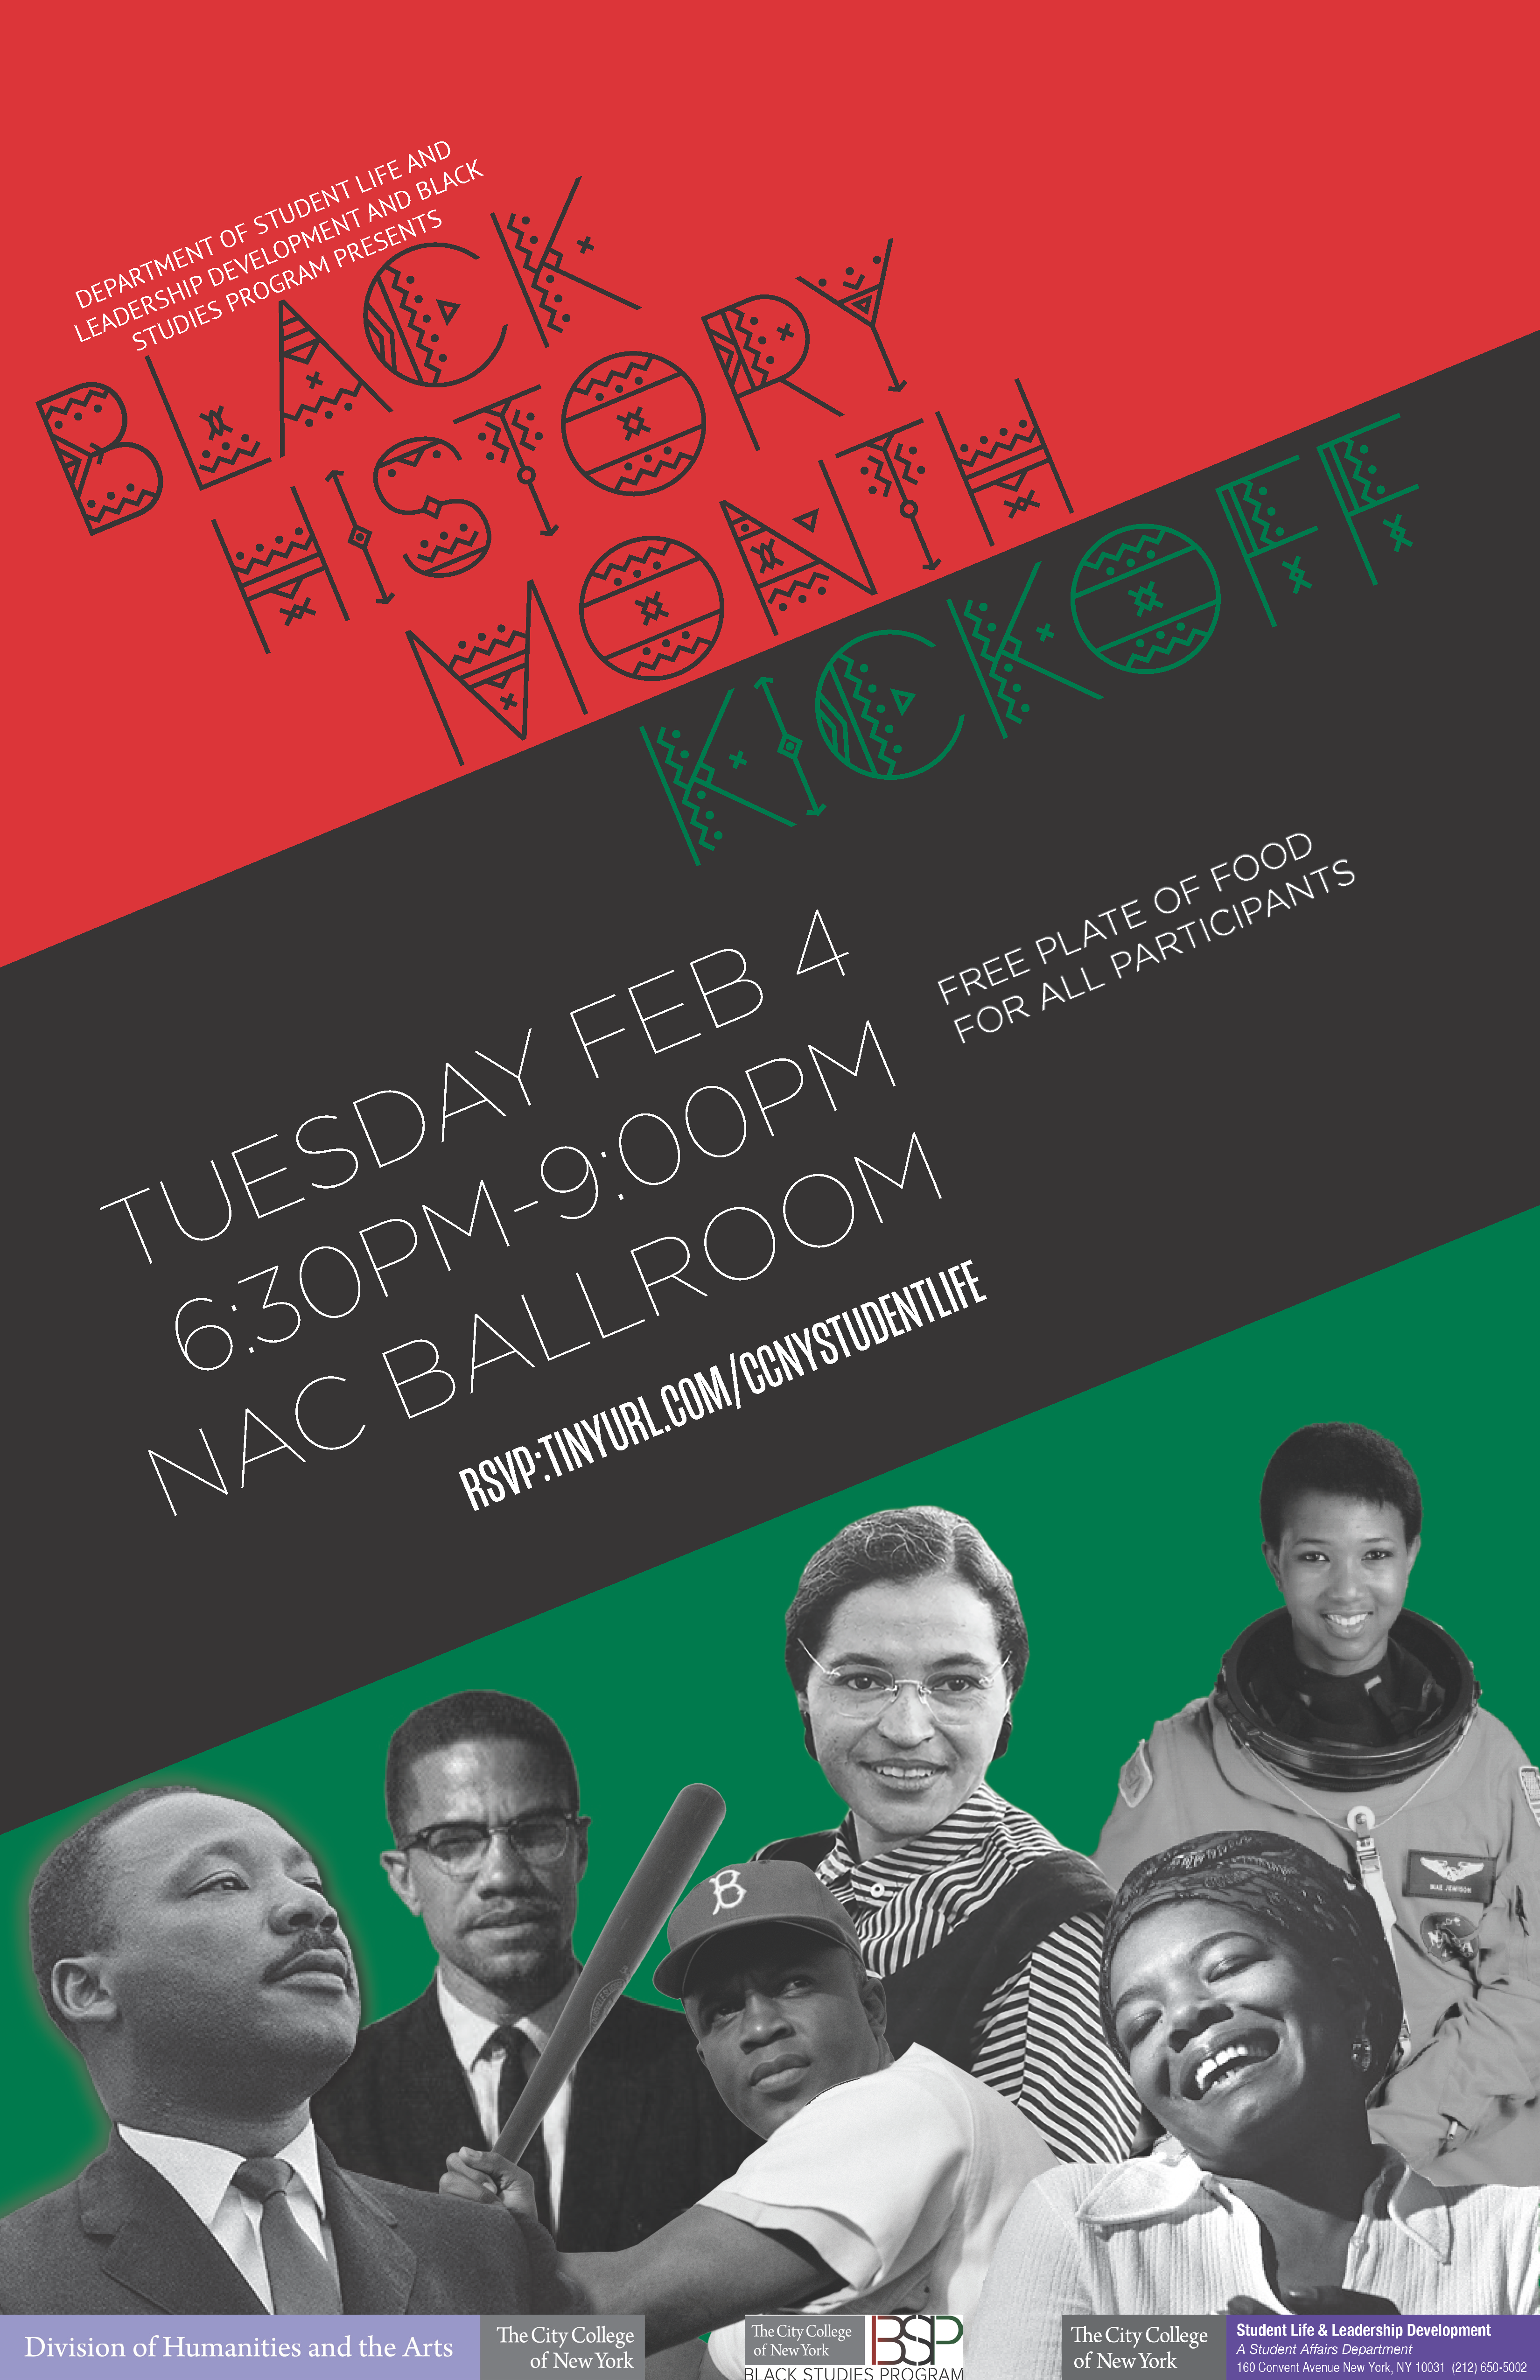 Black History Kick Off, has leaders in the black community and gradient of re/black/green